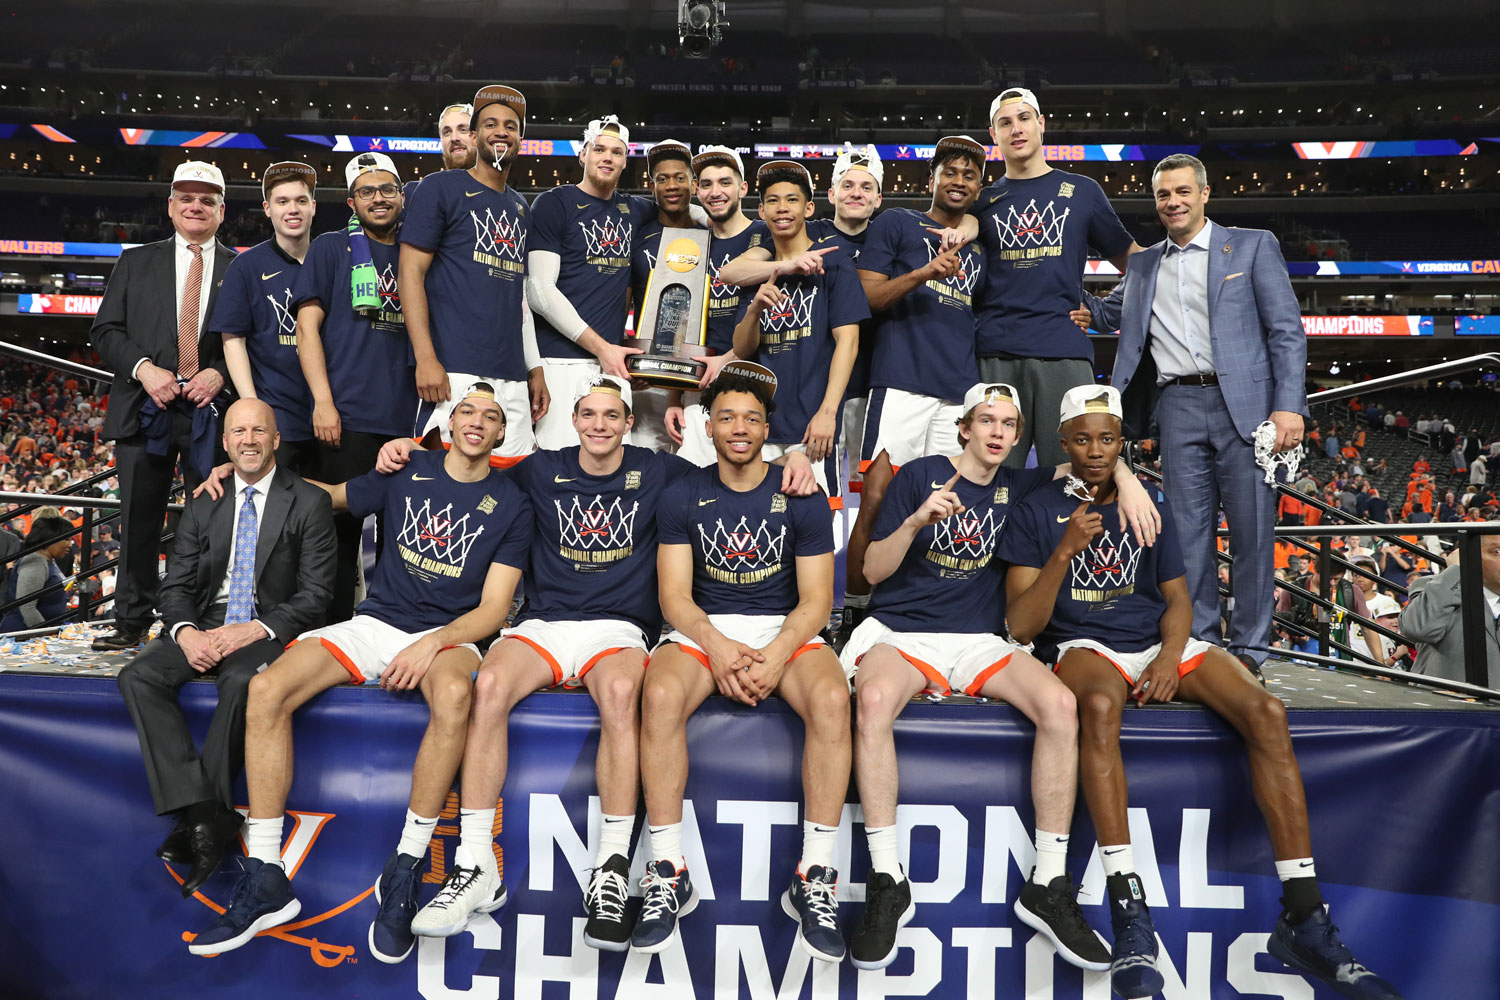 UVA basketball team on stage holding the NCAA trophy